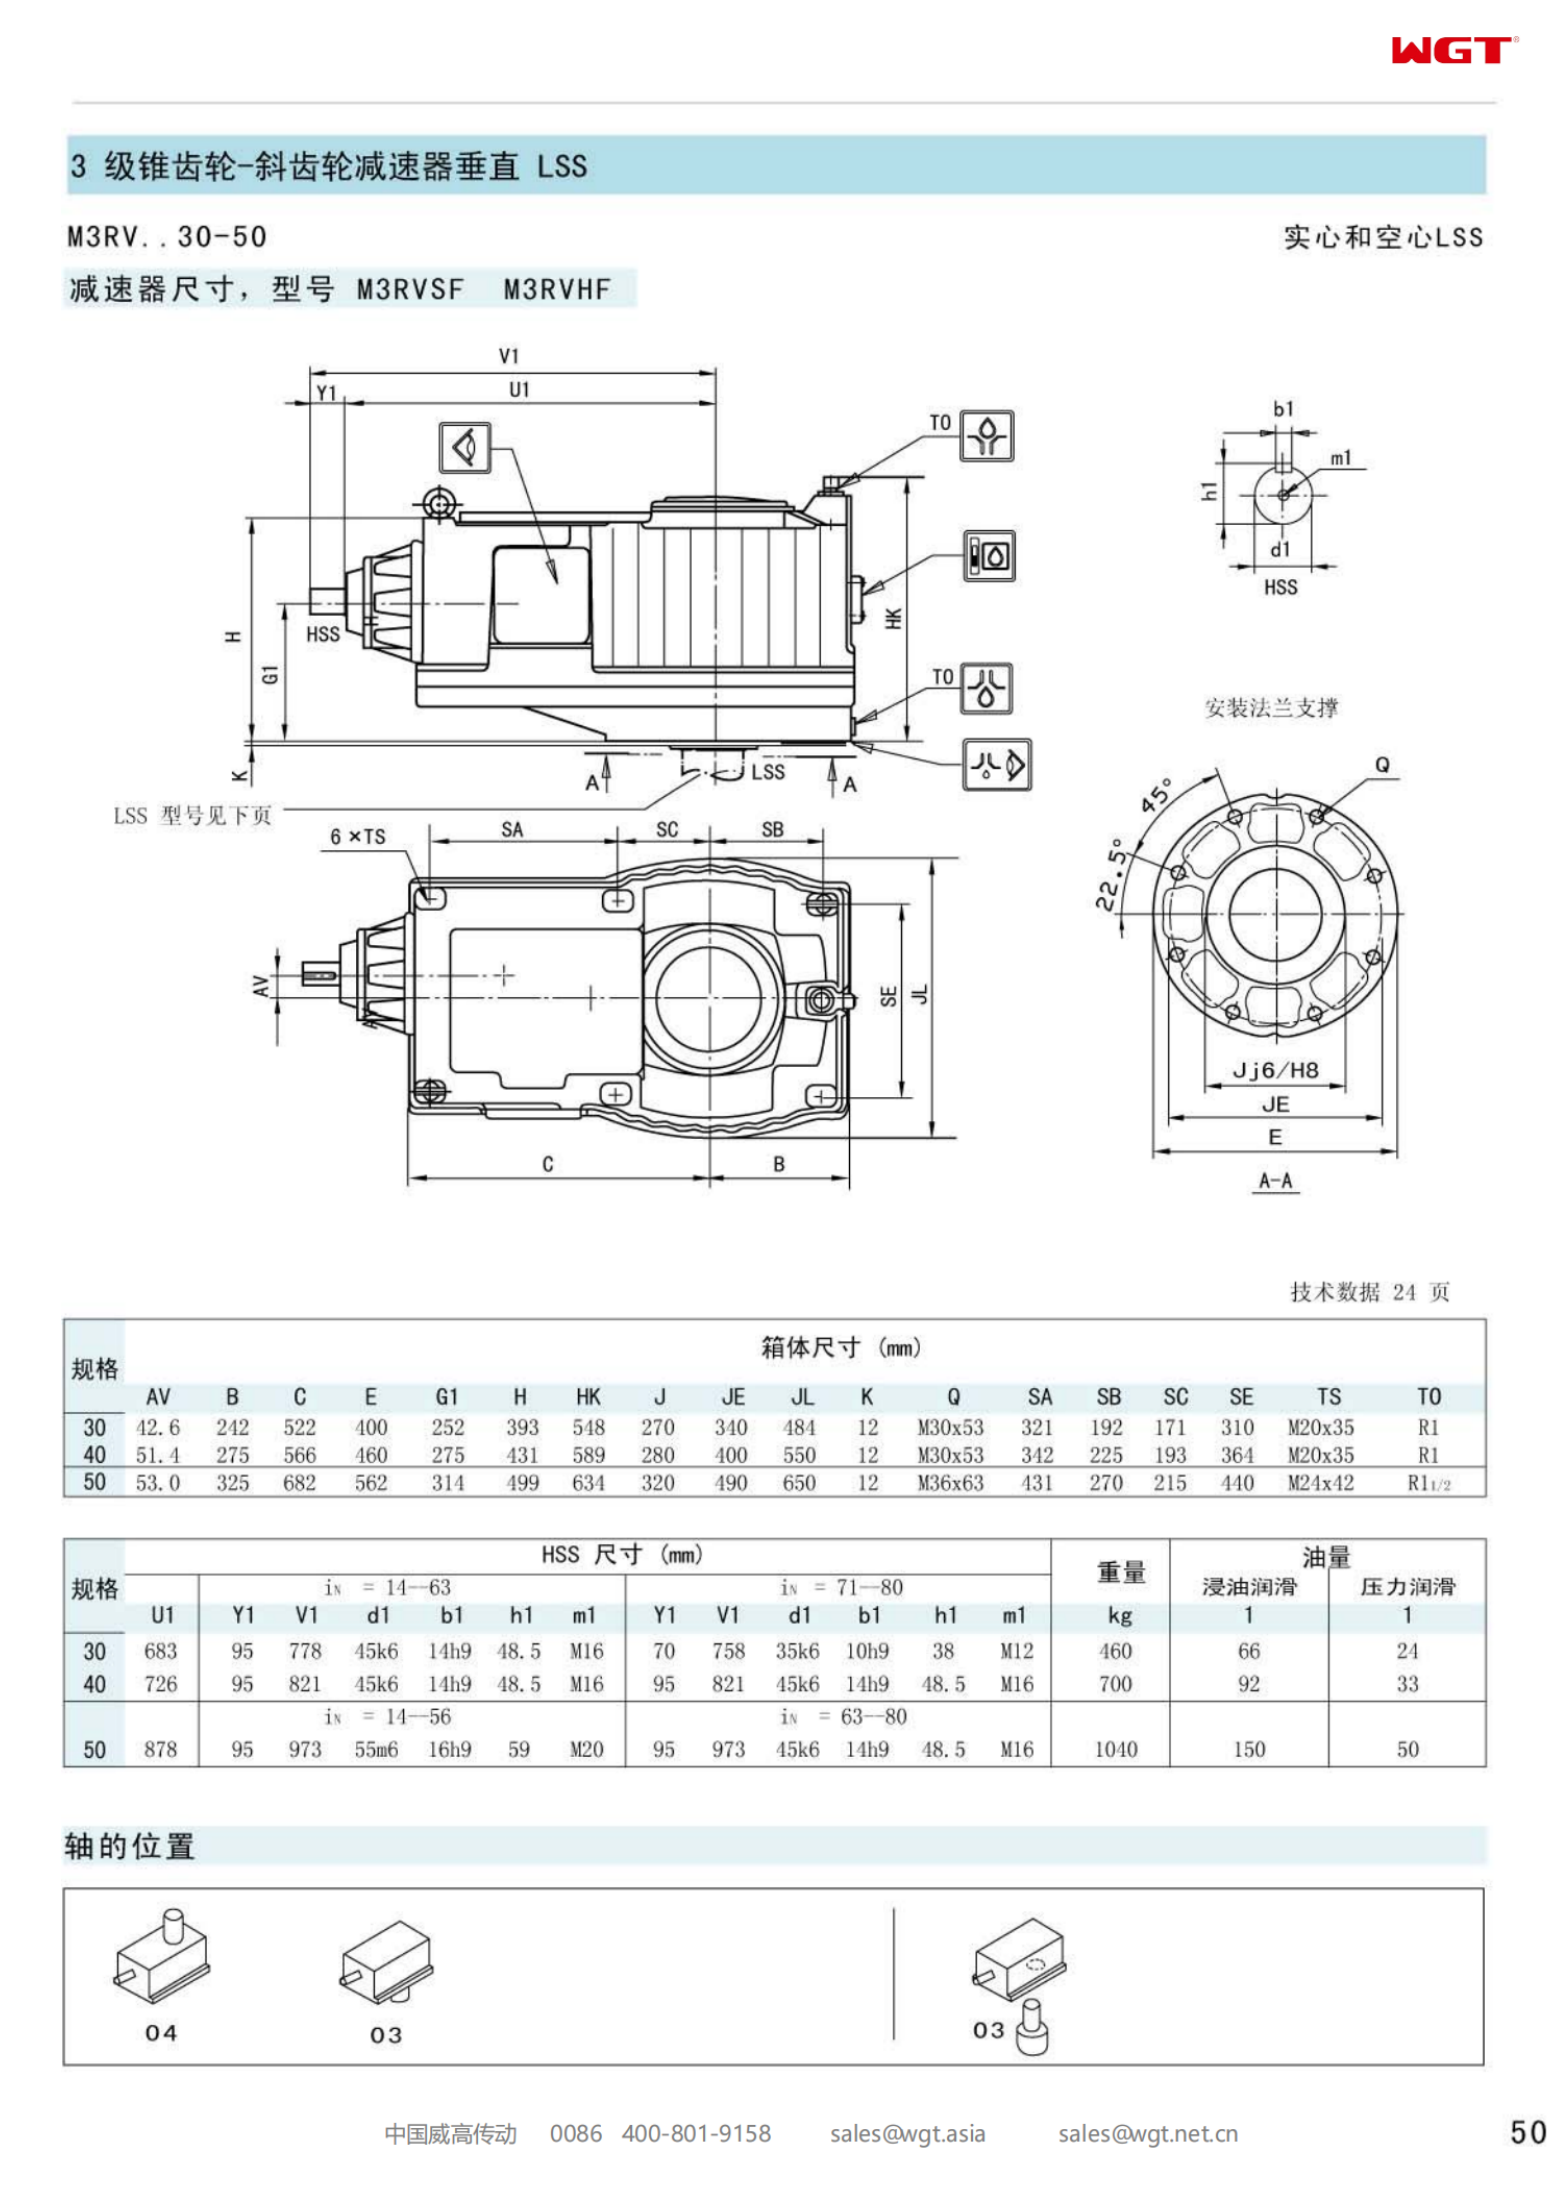 M4PVHF70 Replace_SEW_M_Series Gearbox